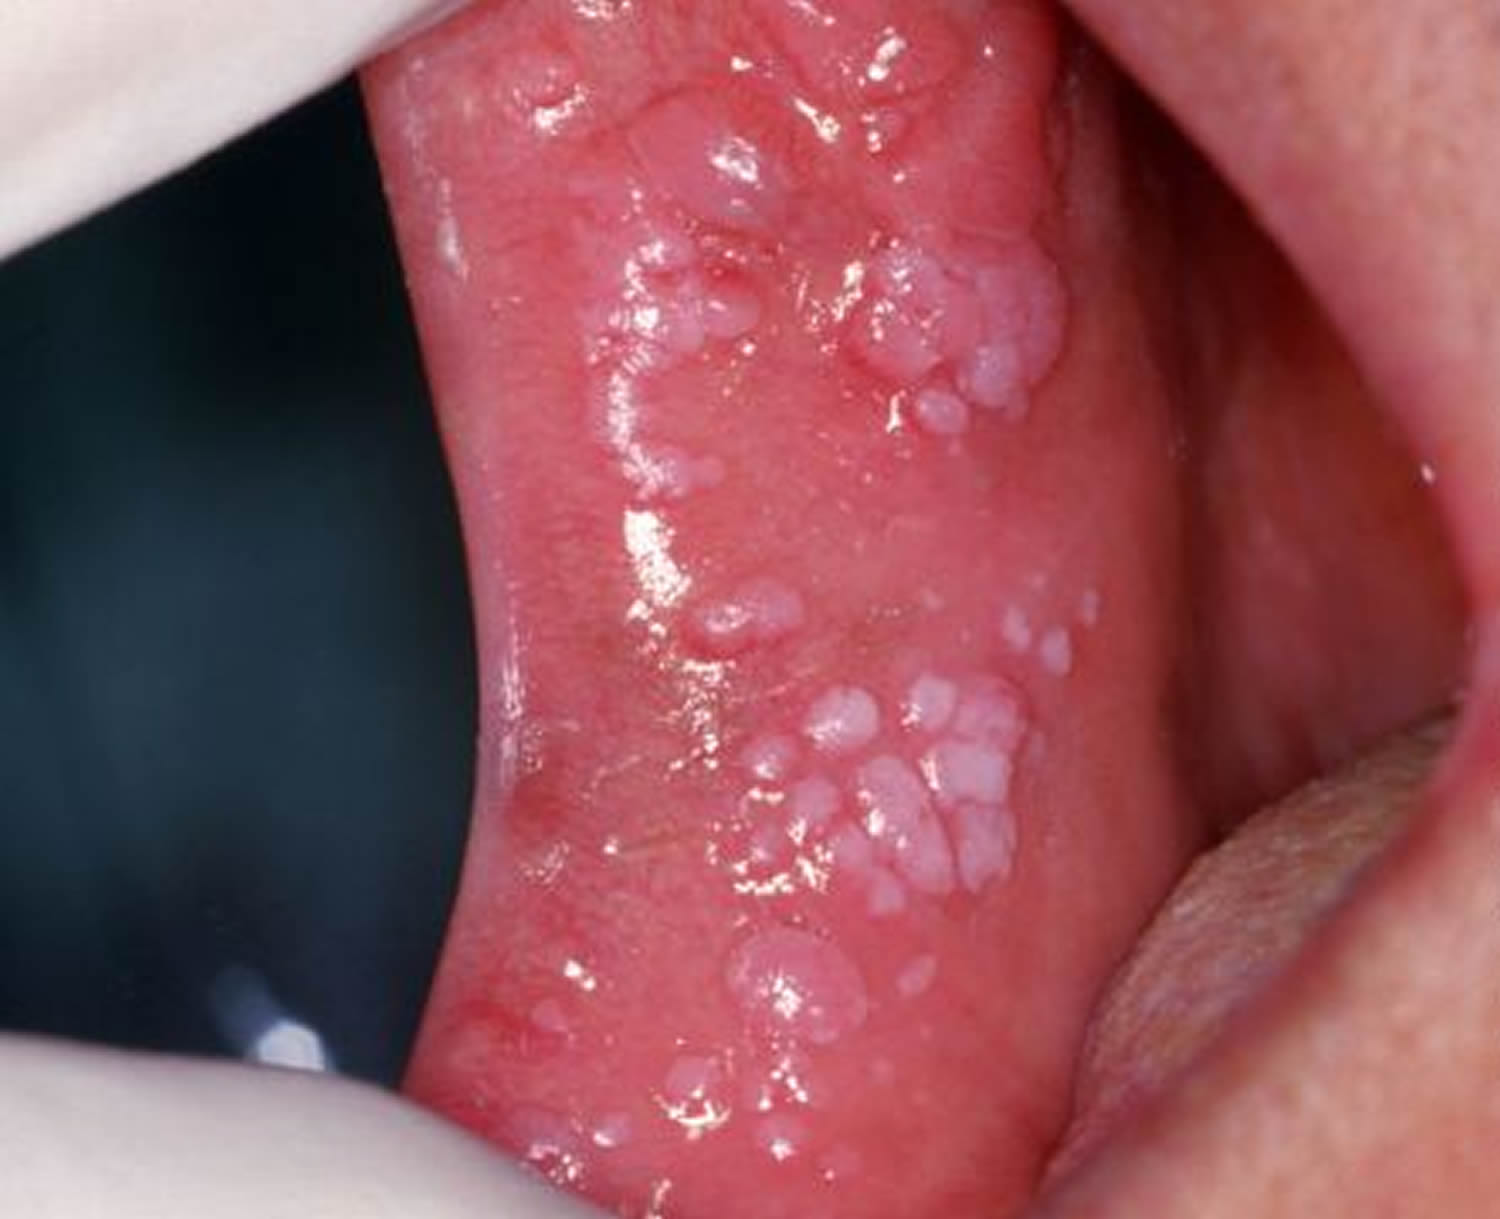 Genital Warts Around The Mouth